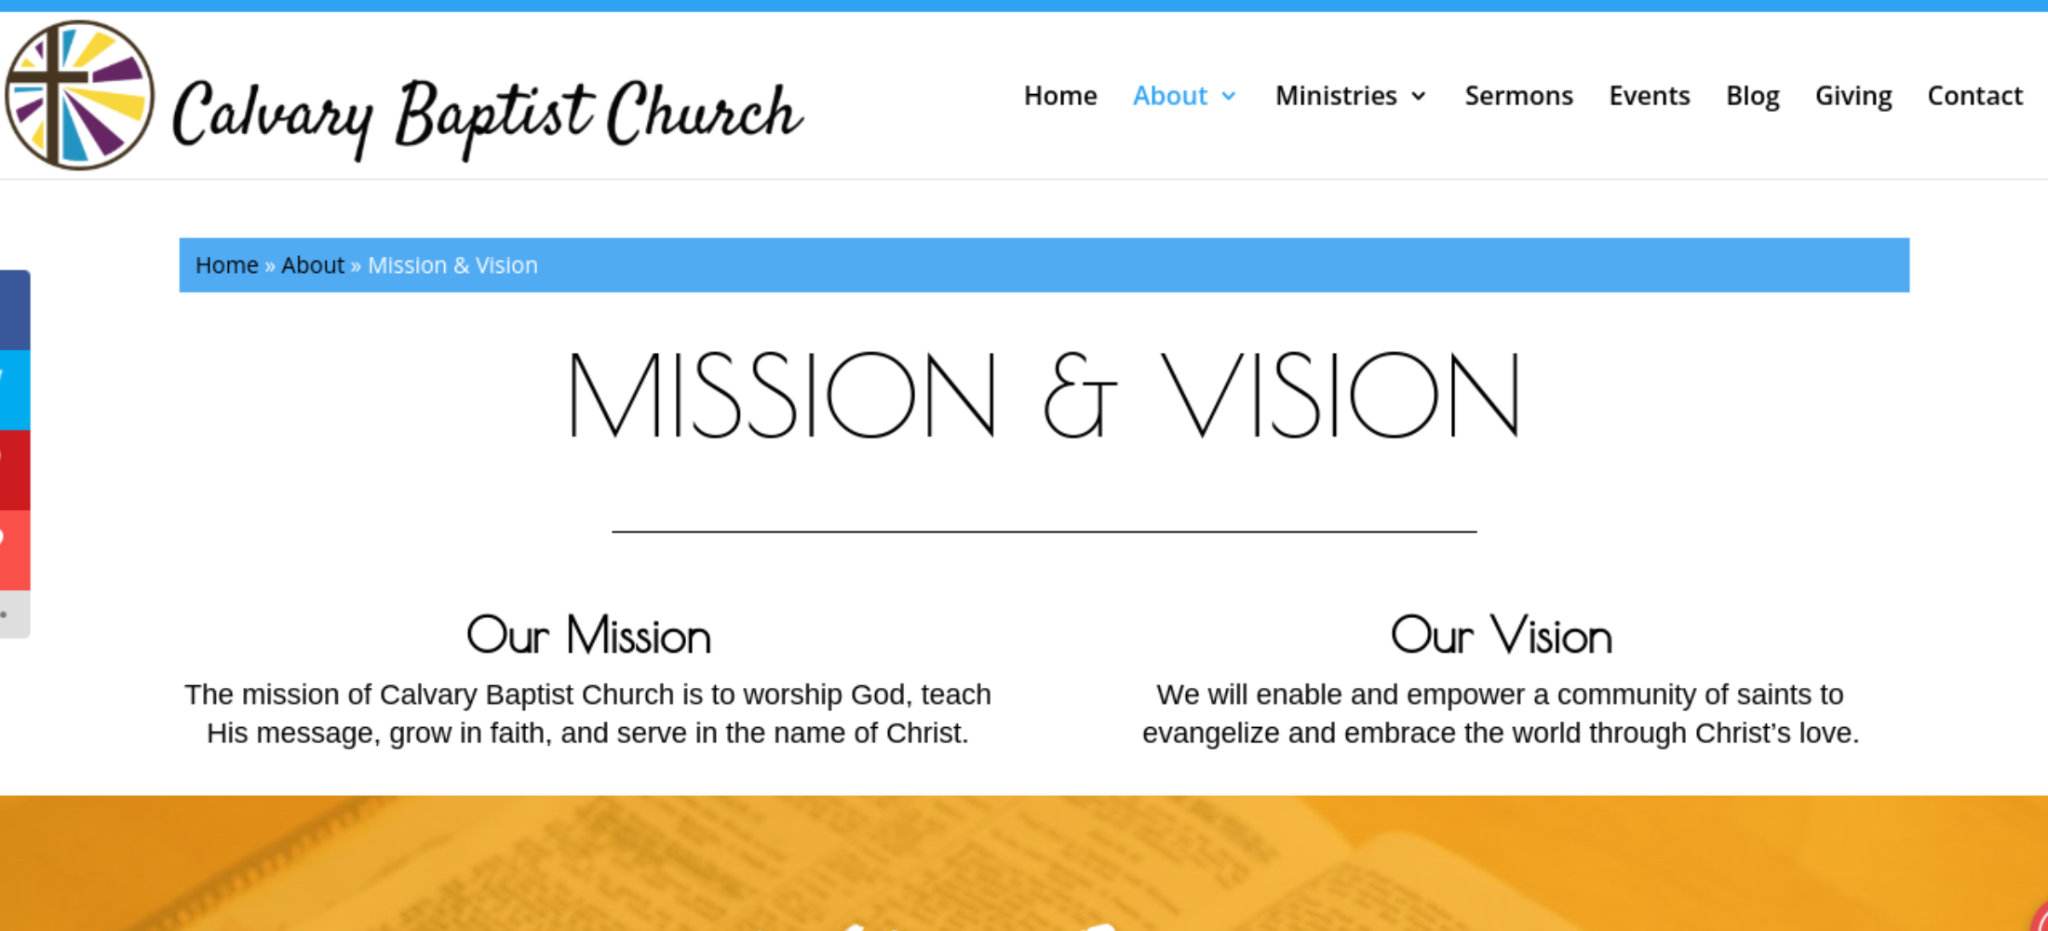 Screenshot of Calvary Baptist Church's website showing their mission and vision statement. 